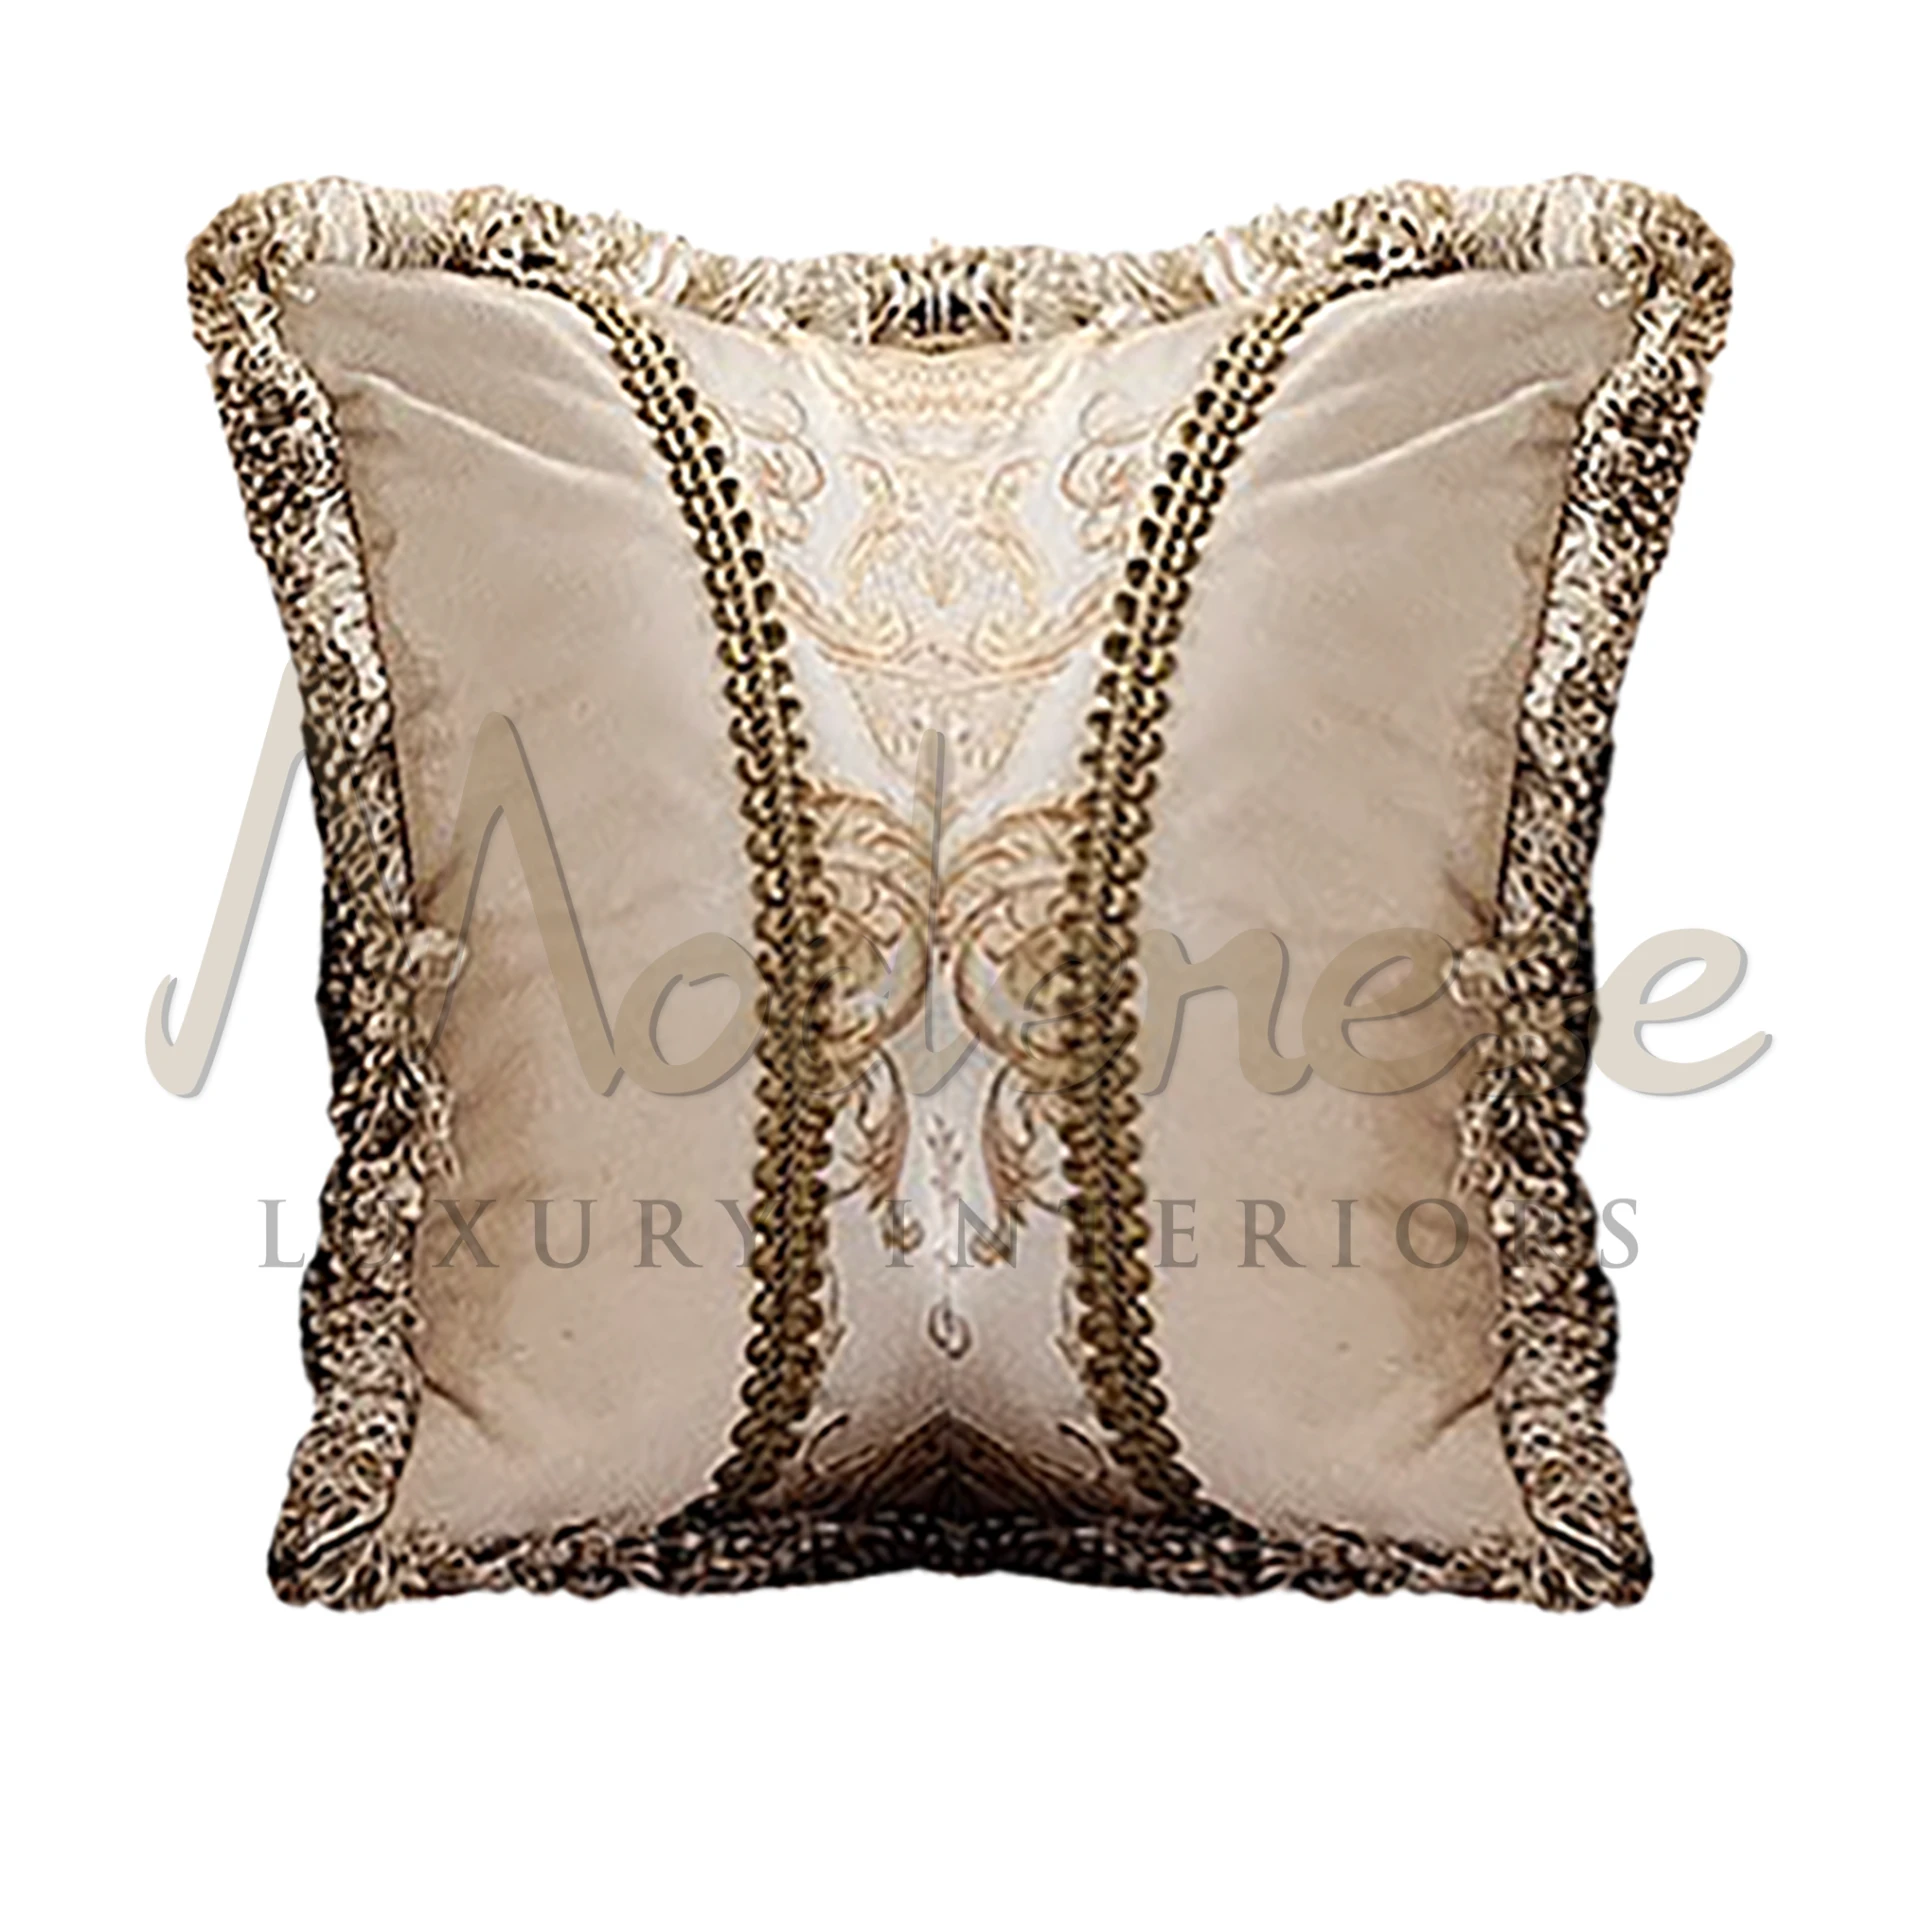 Traditional Beige Pillow with classic design, clean lines, and simple patterns, showcasing Italian luxury and quality textiles.